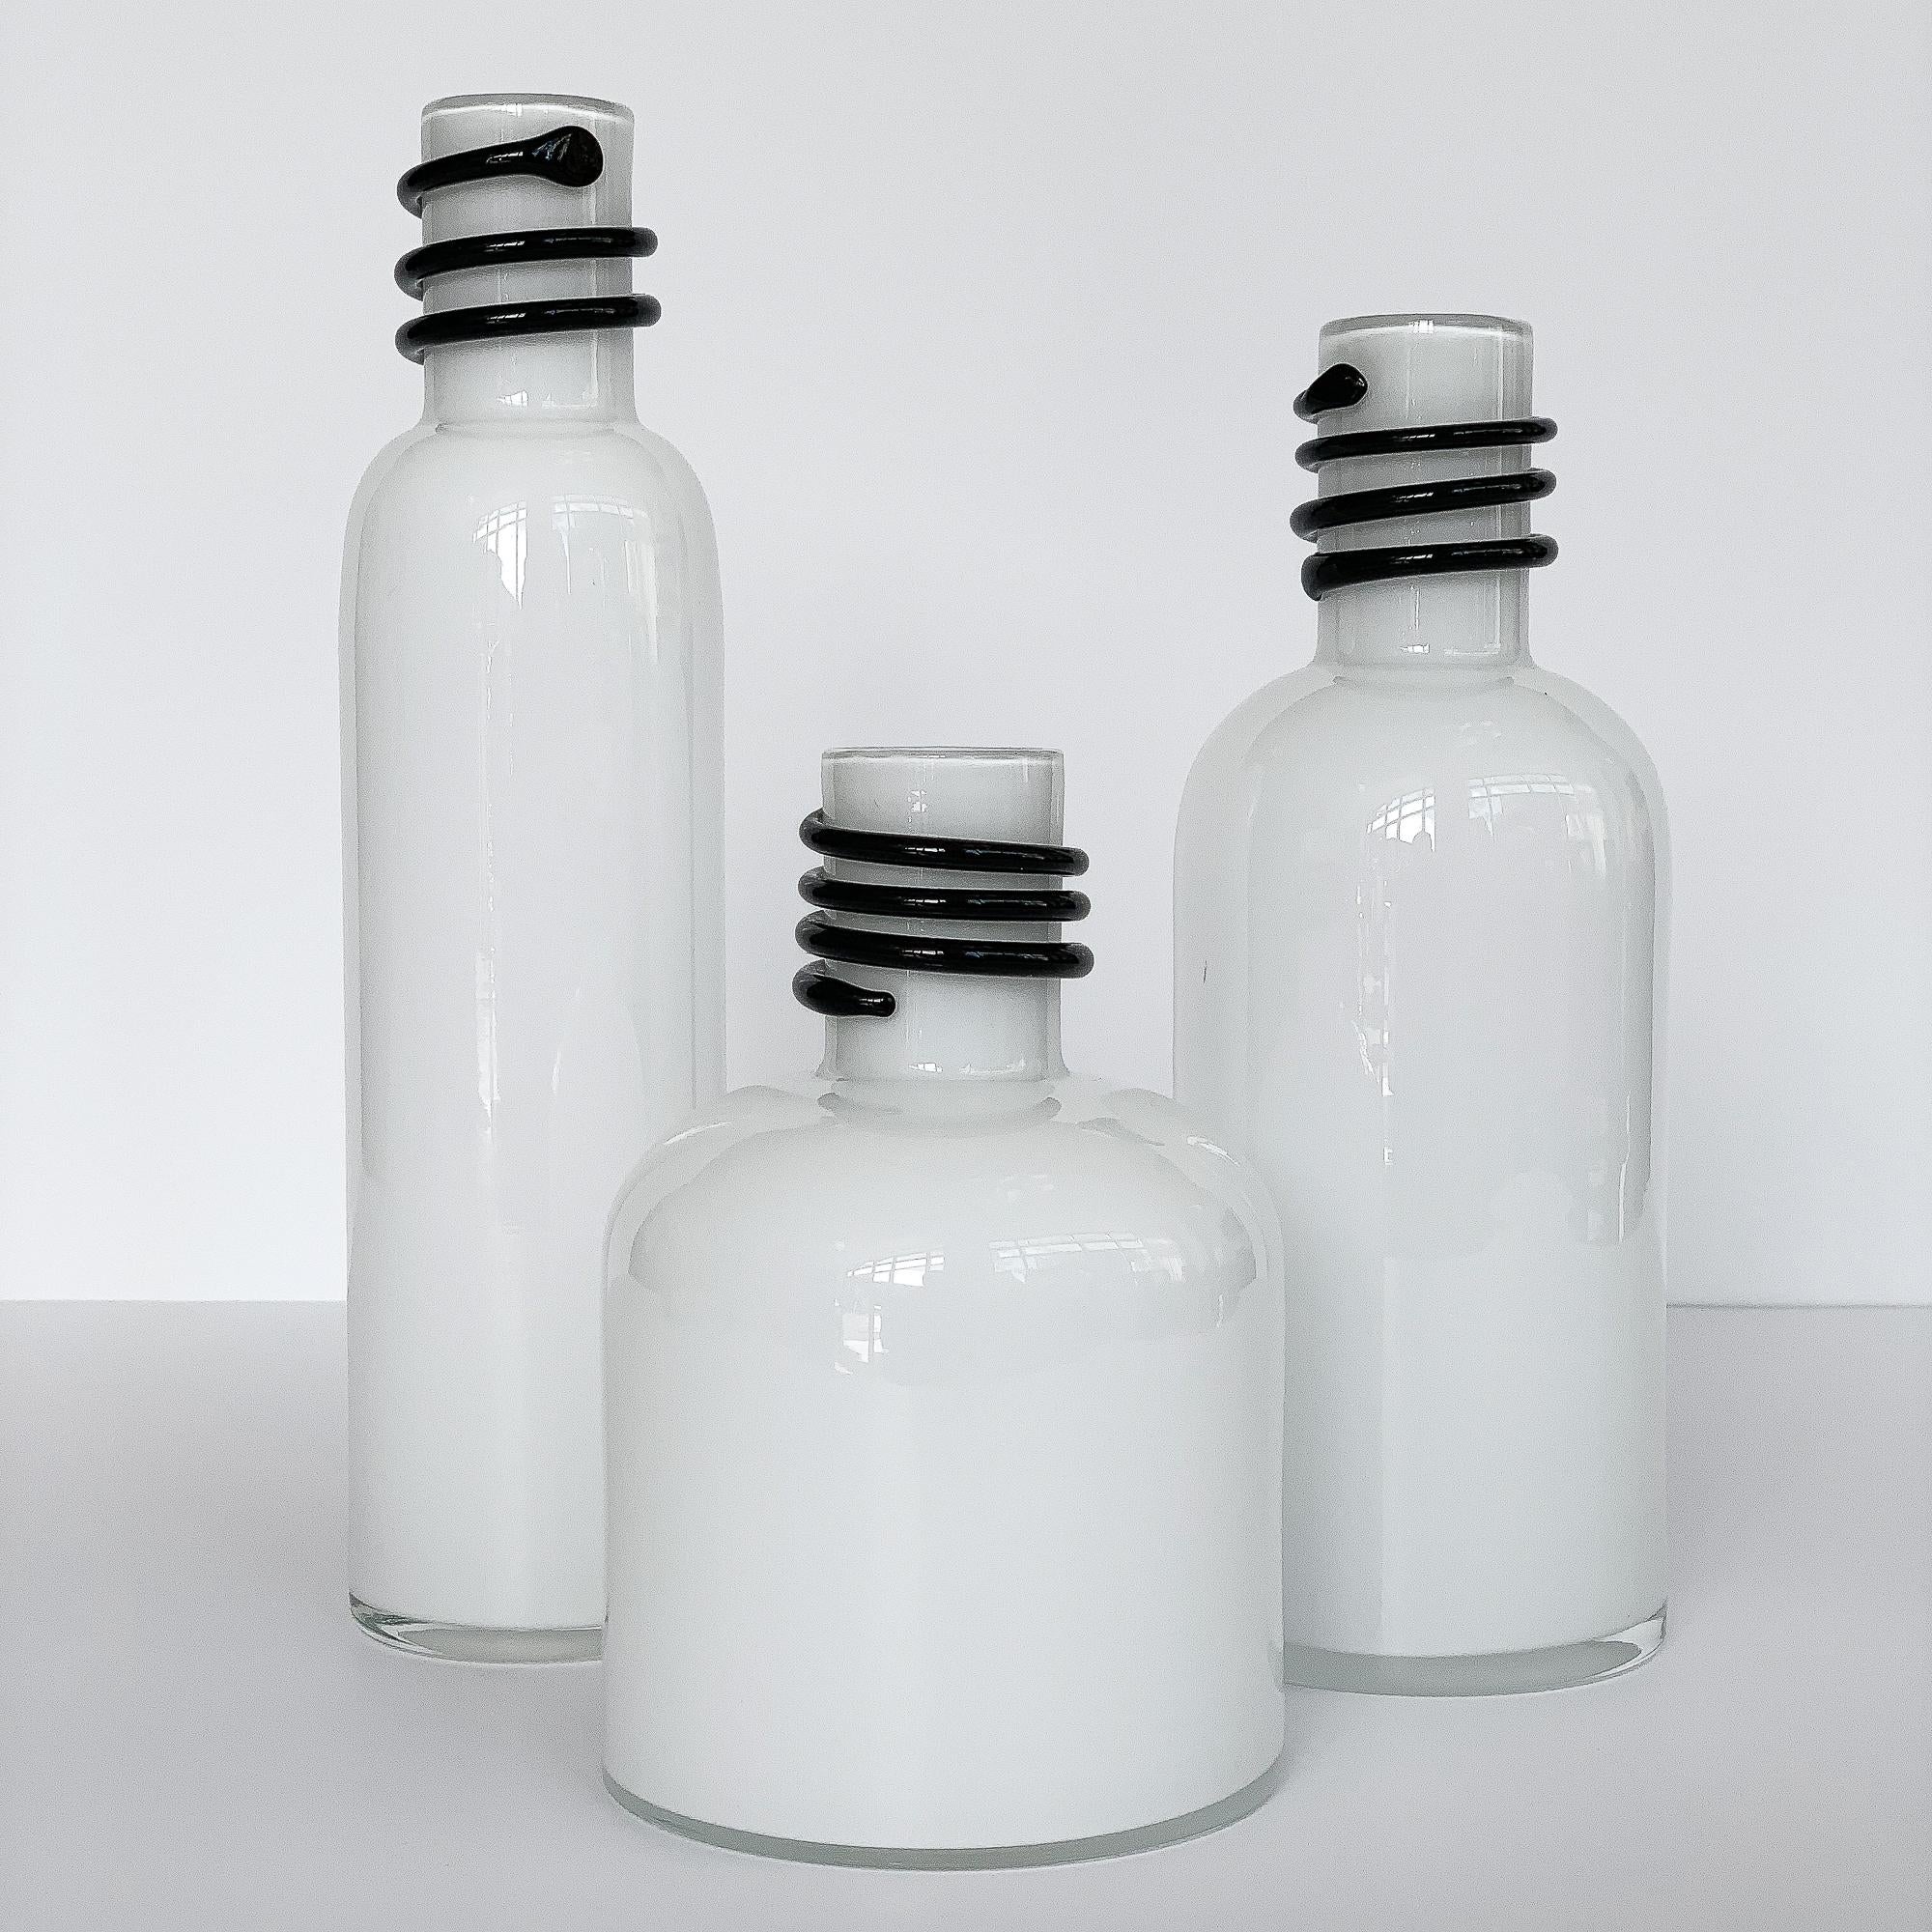 Set of 3 handmade cased glass vases / bottles by Jerzy Sluczan-Orkusz for Tarnowiec, circa 1980s, Poland. From the Butli series. White cased glass with an applied spiral of black glass around each neck. Perfect for any Postmodern / Memphis interior!